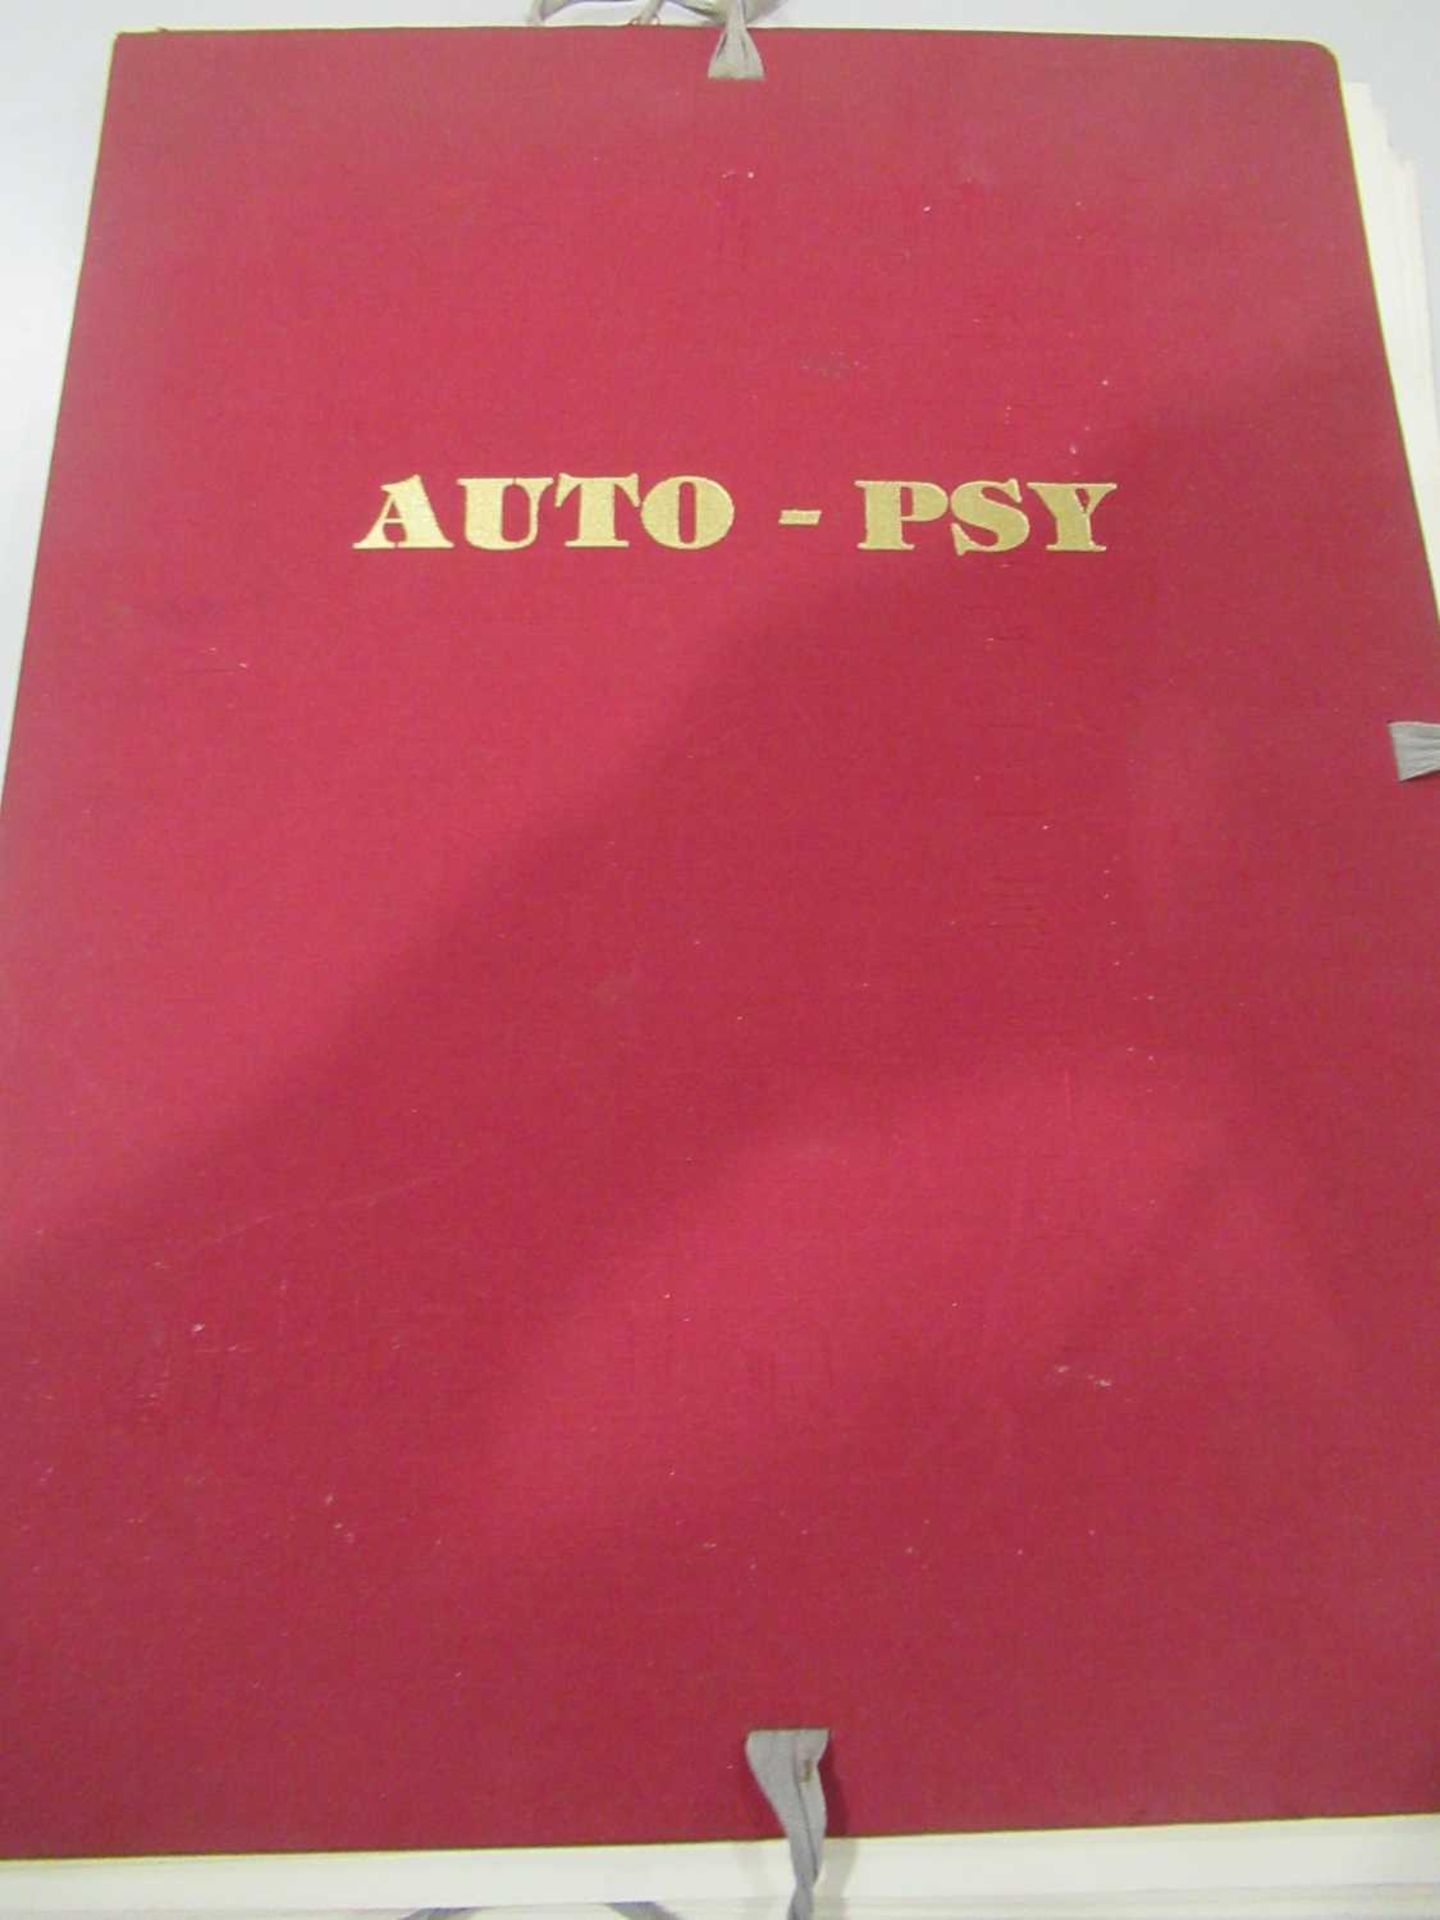 Auto-Psy: A limited edition of 2000 bound copies containing 23 loose pages, 18 of which are - Image 5 of 5